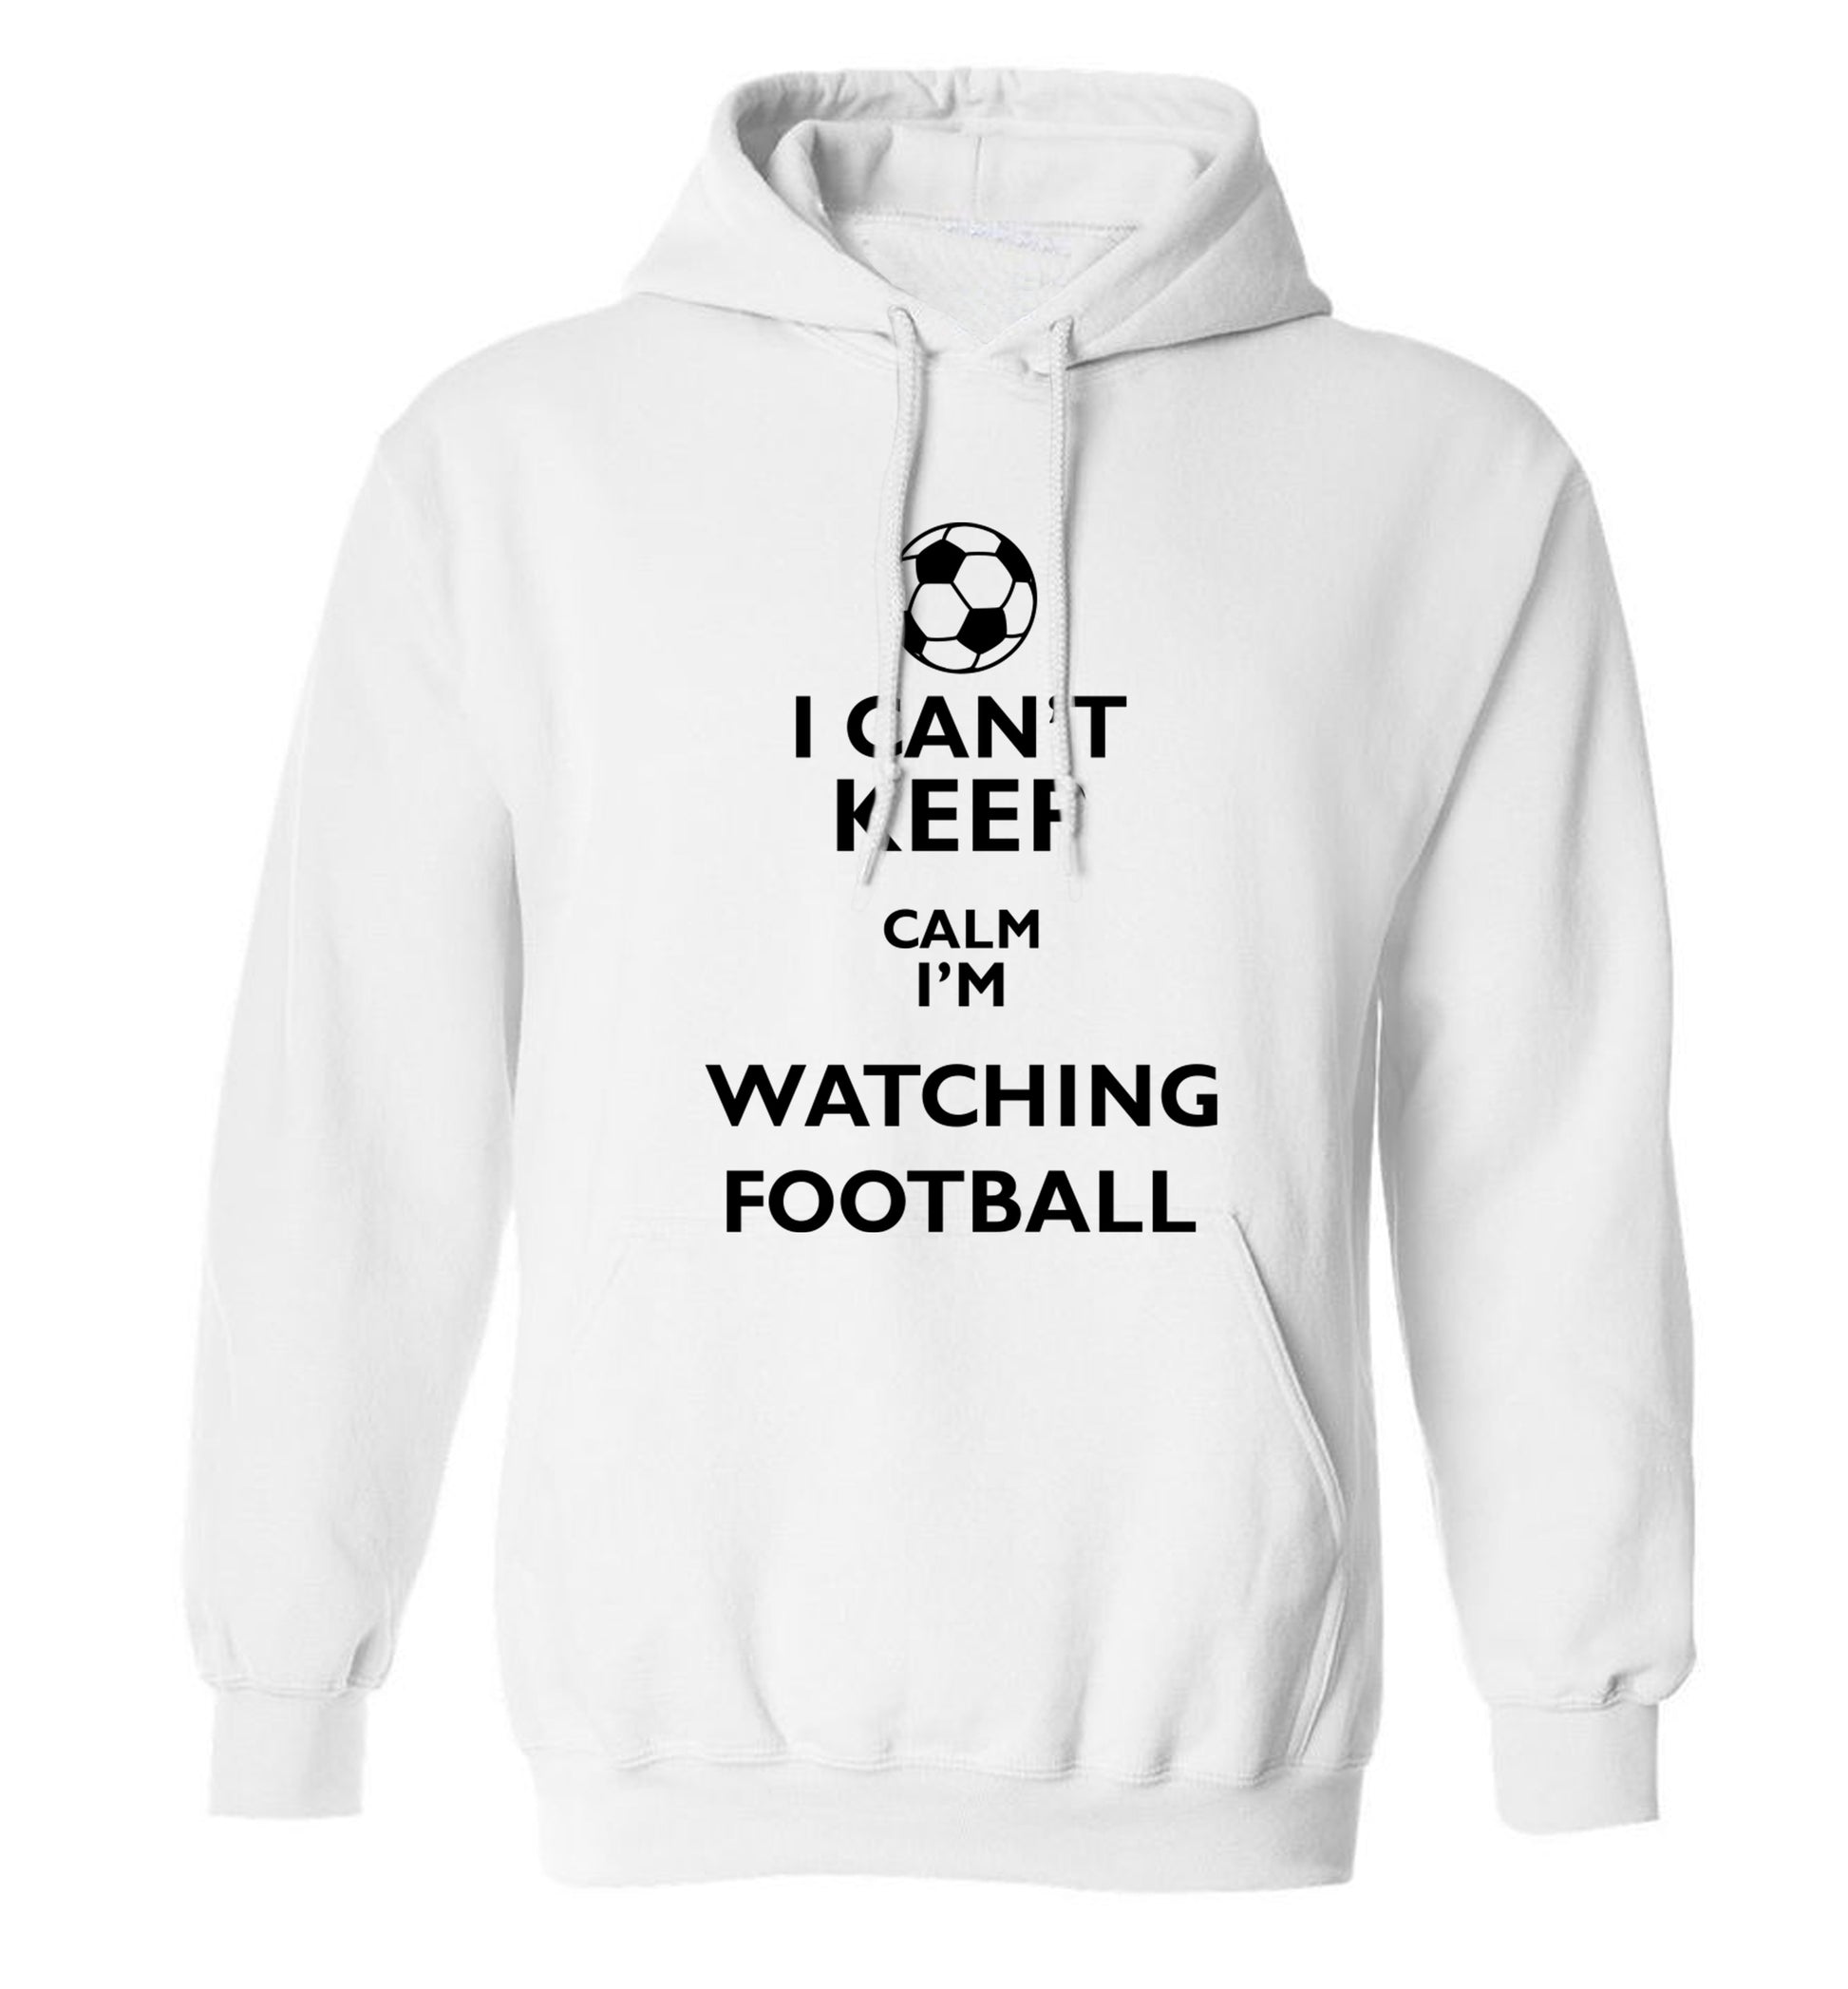 I can't keep calm I'm watching the football adults unisexwhite hoodie 2XL